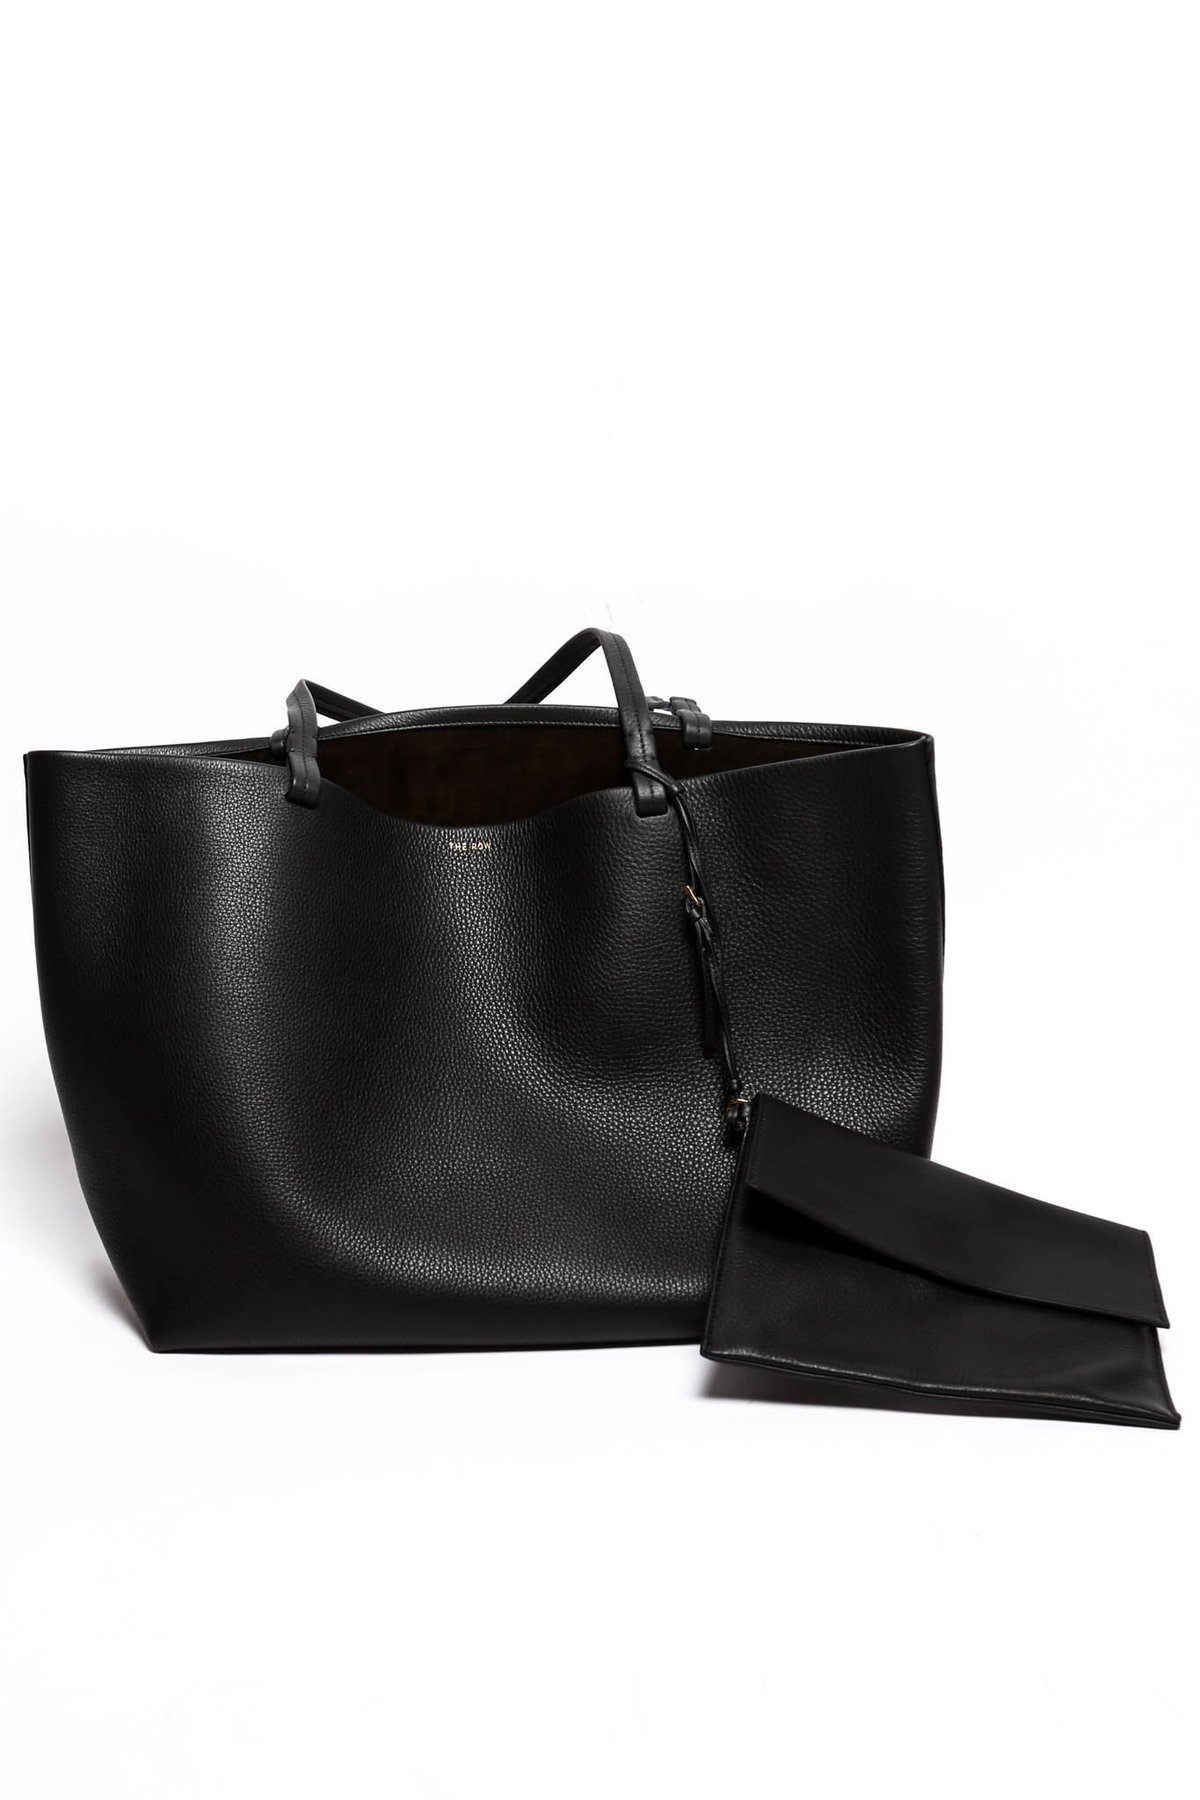 The Row 'Park' Tote Pouch